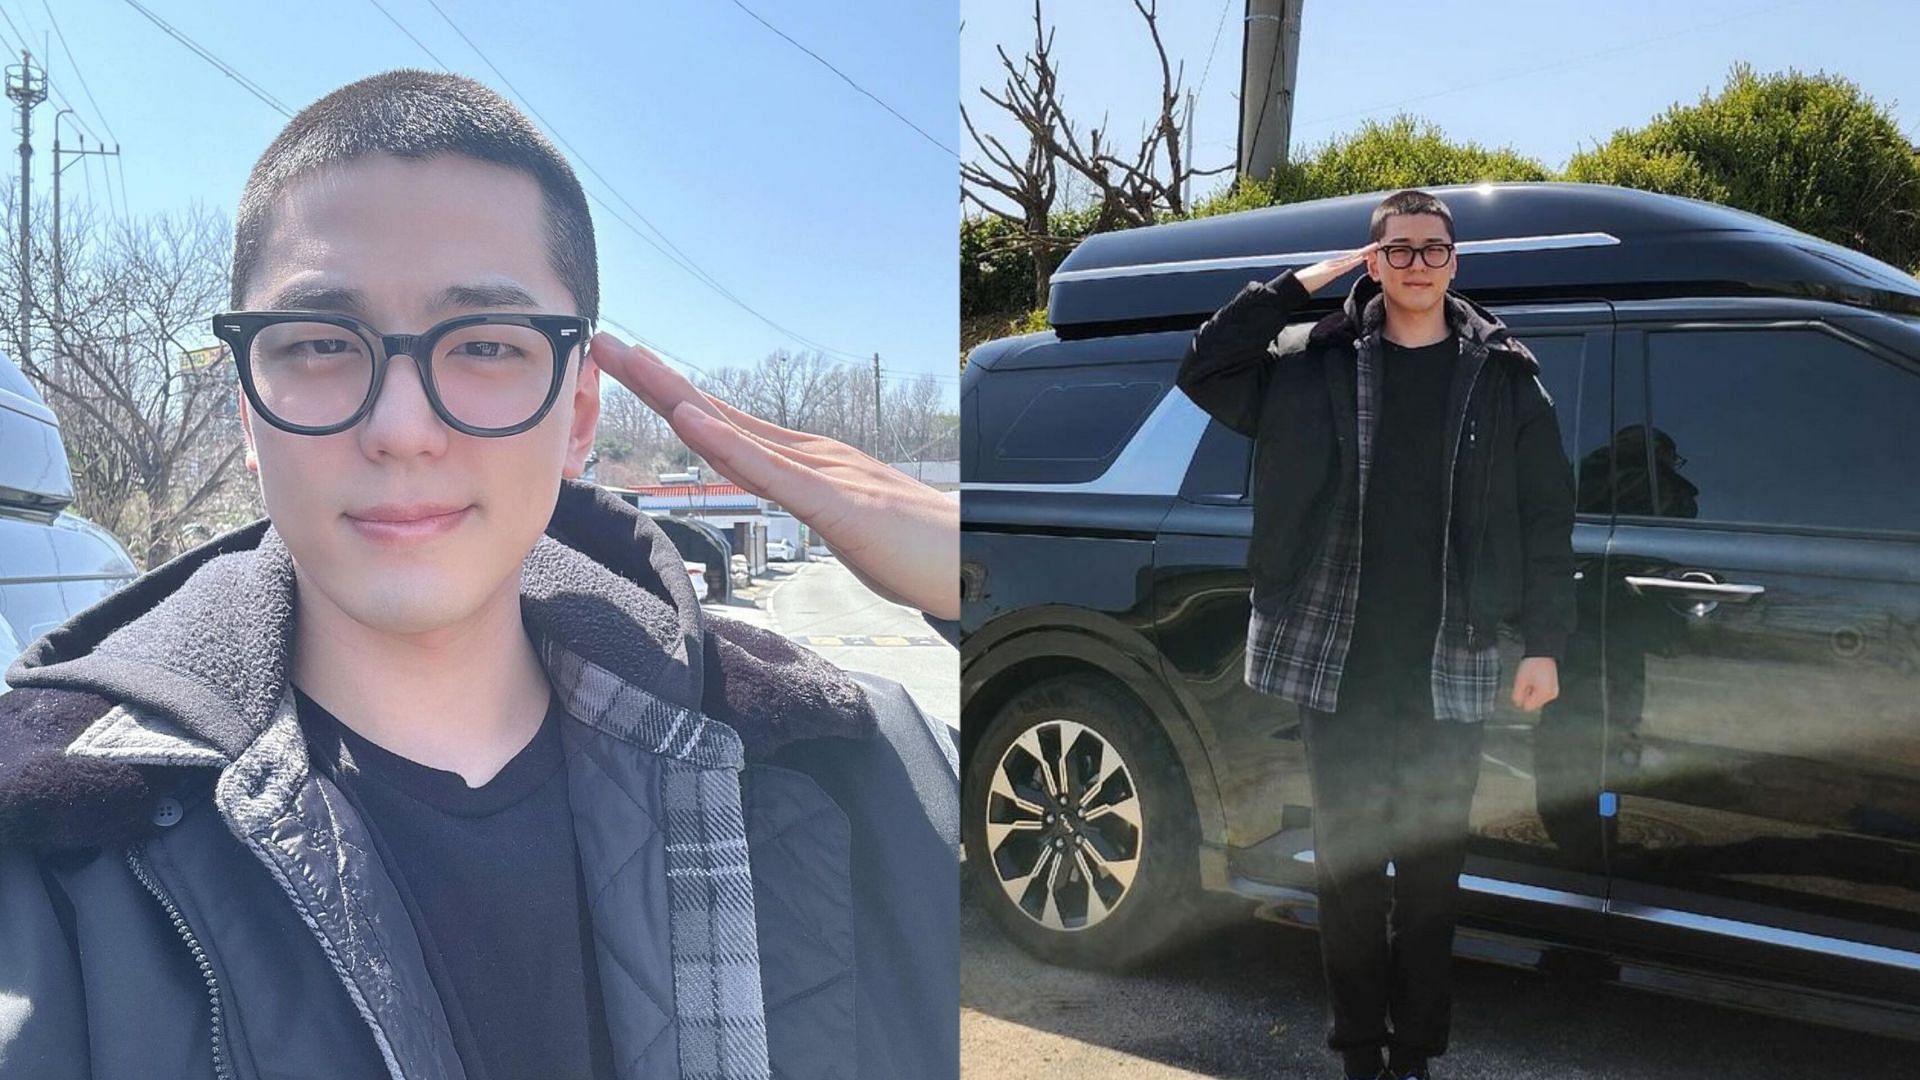 Business Proposal fame Kim Min-kyu enlisted in the military, shares fresh buzzcut photos (Images via Instagram/@mingue.k)